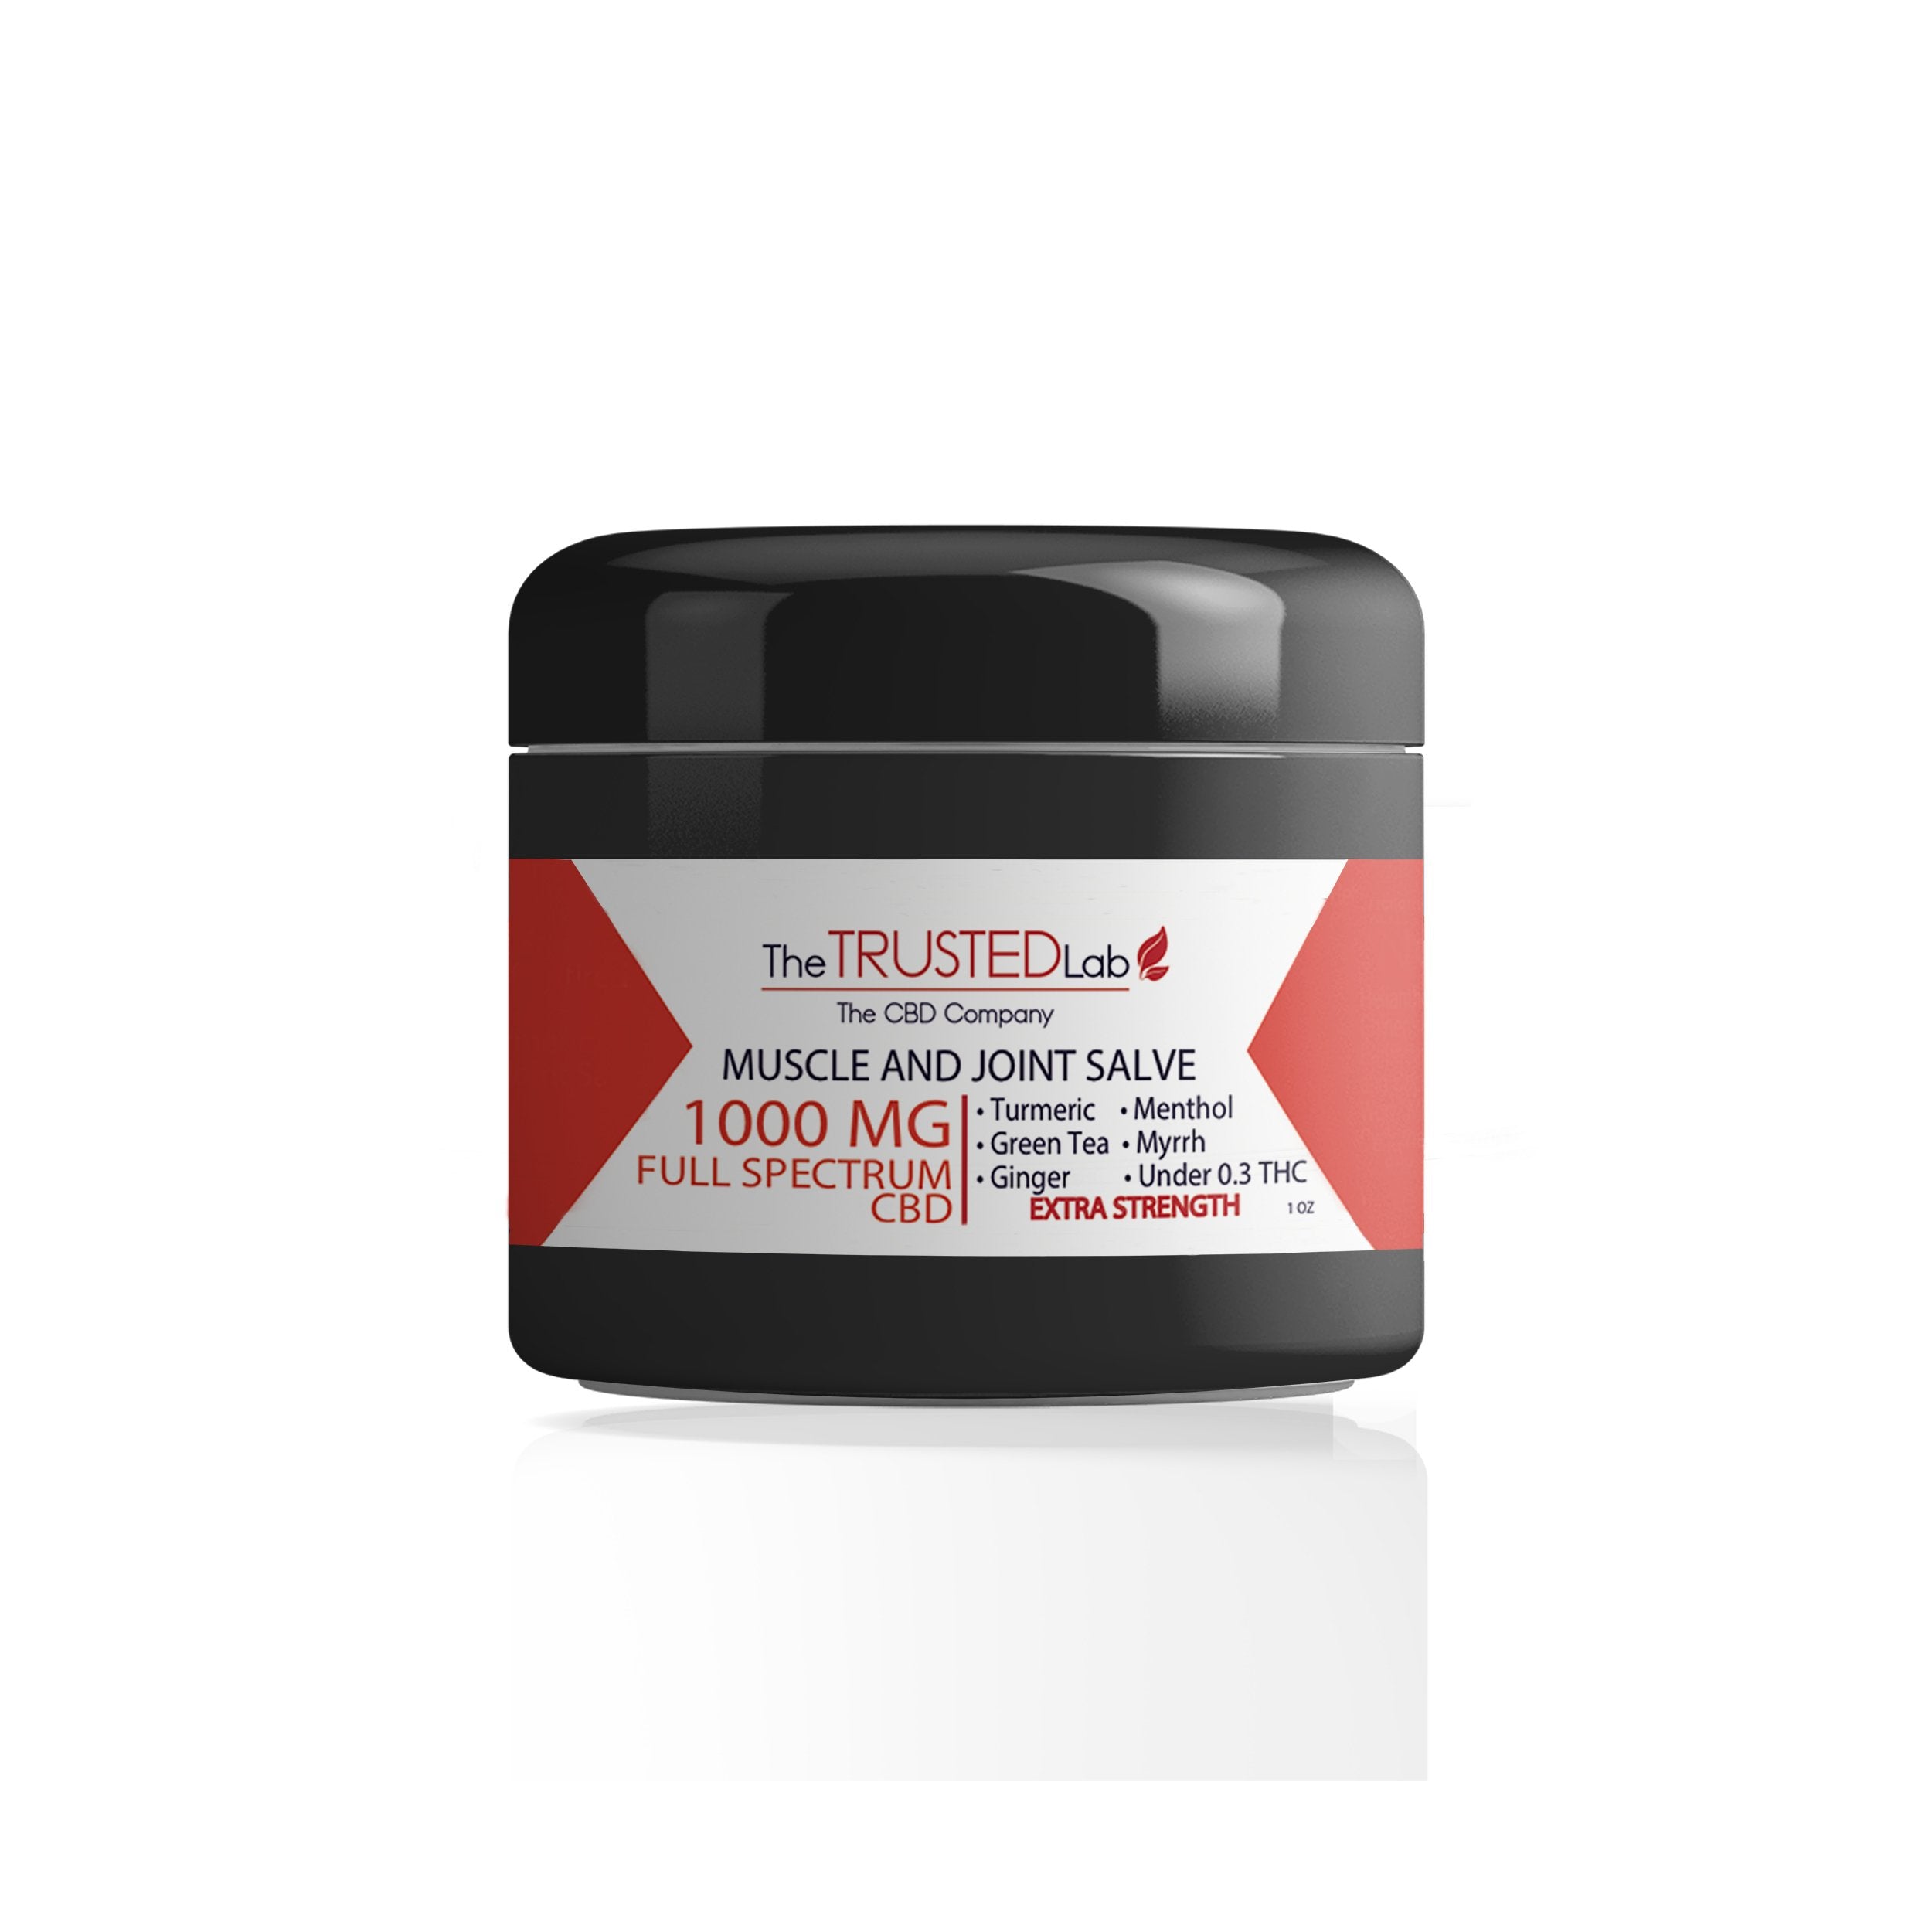 The Trusted Lab Muscle and Joint Salve Maximum Strength 1,000 mg Full Spectrum CBD Best Price